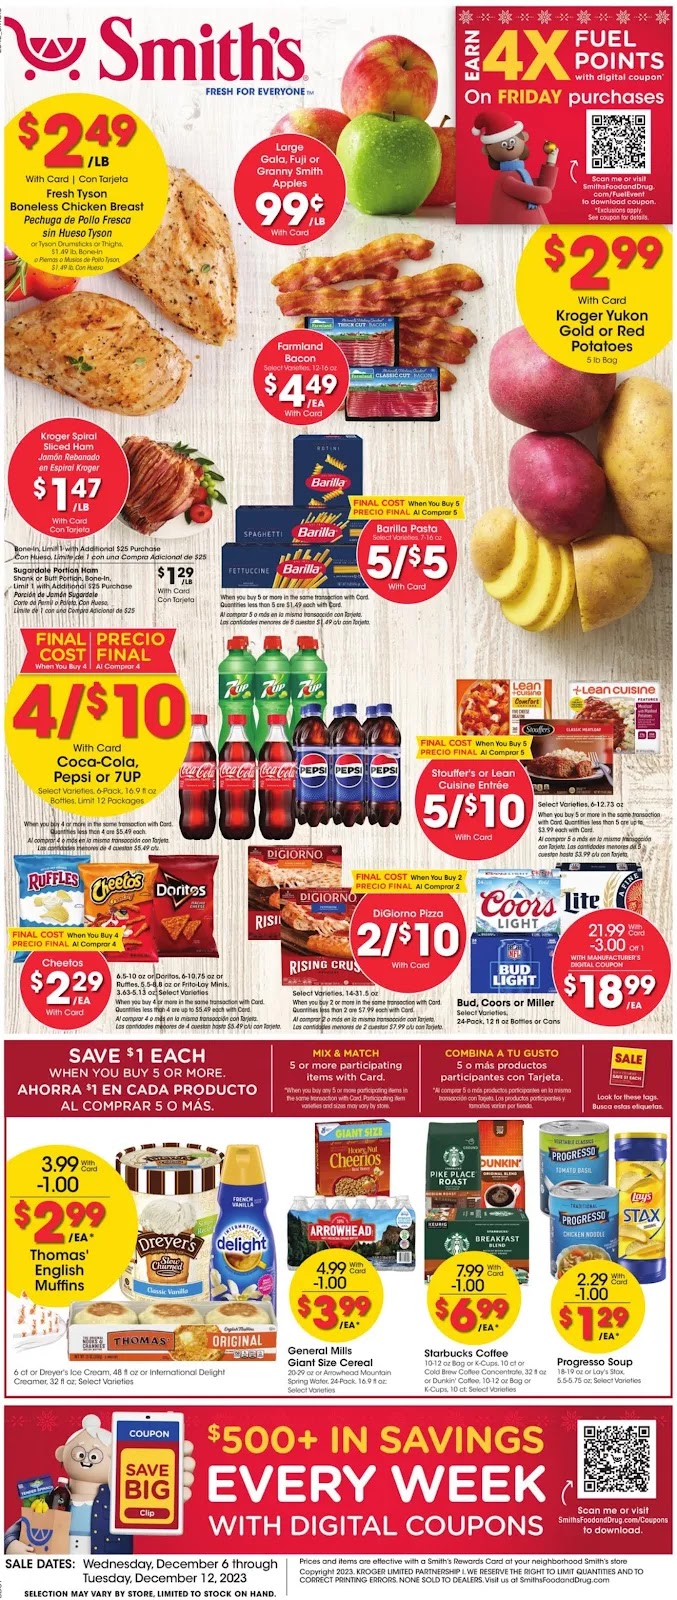 Michaels Weekly Flyer - Weekly Deals - The Big Summer Sale - May 12 – 18 